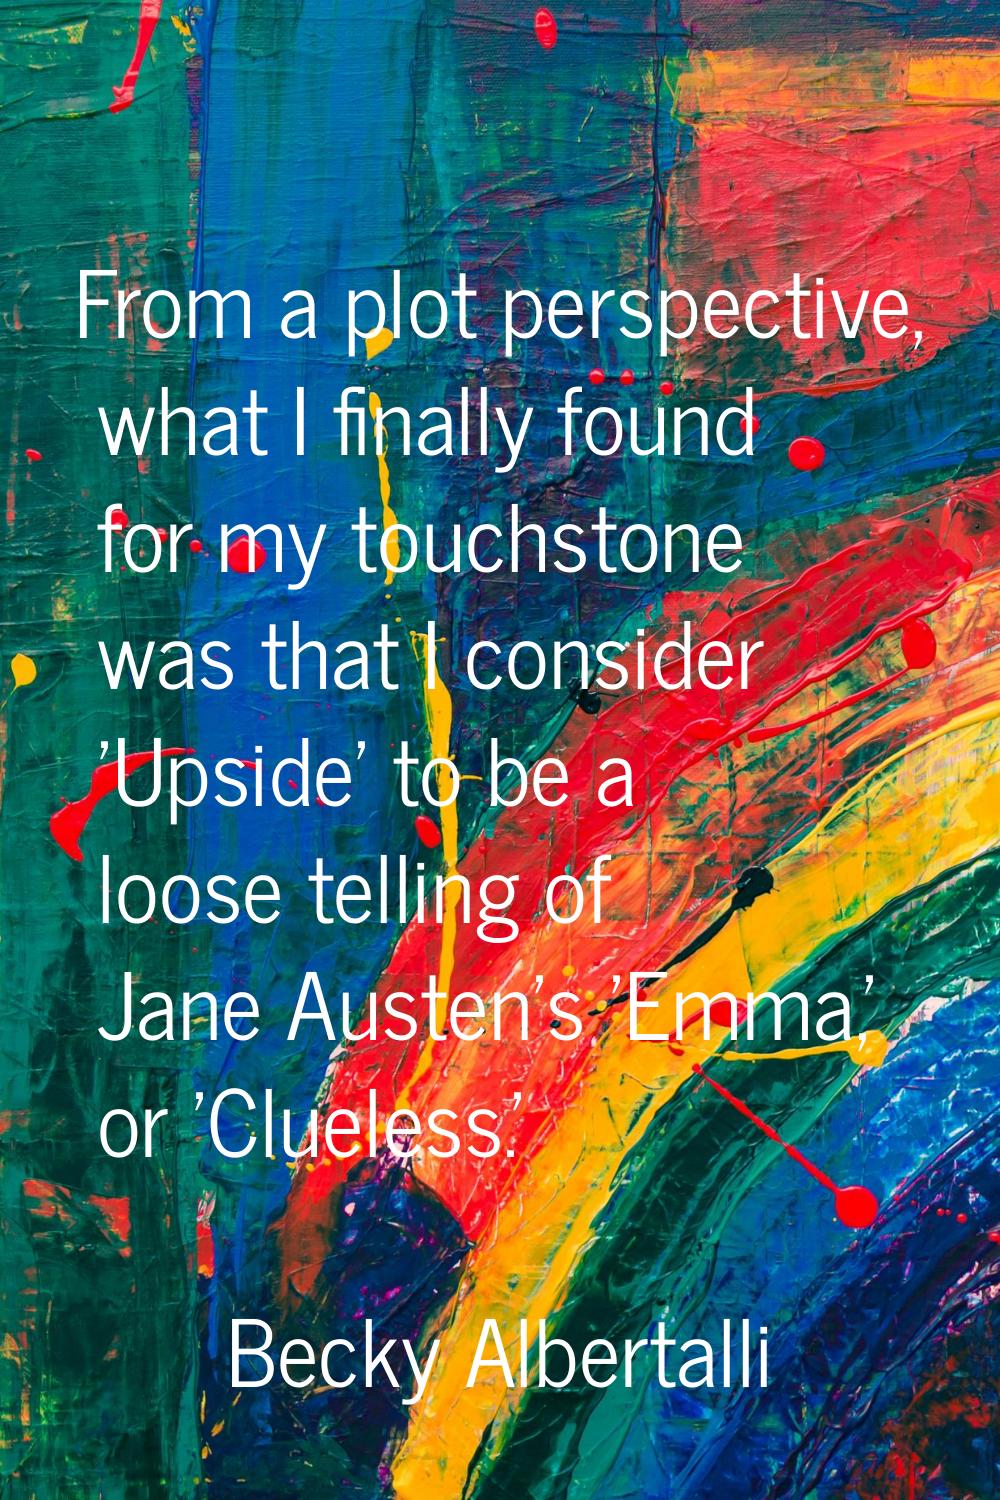 From a plot perspective, what I finally found for my touchstone was that I consider 'Upside' to be 